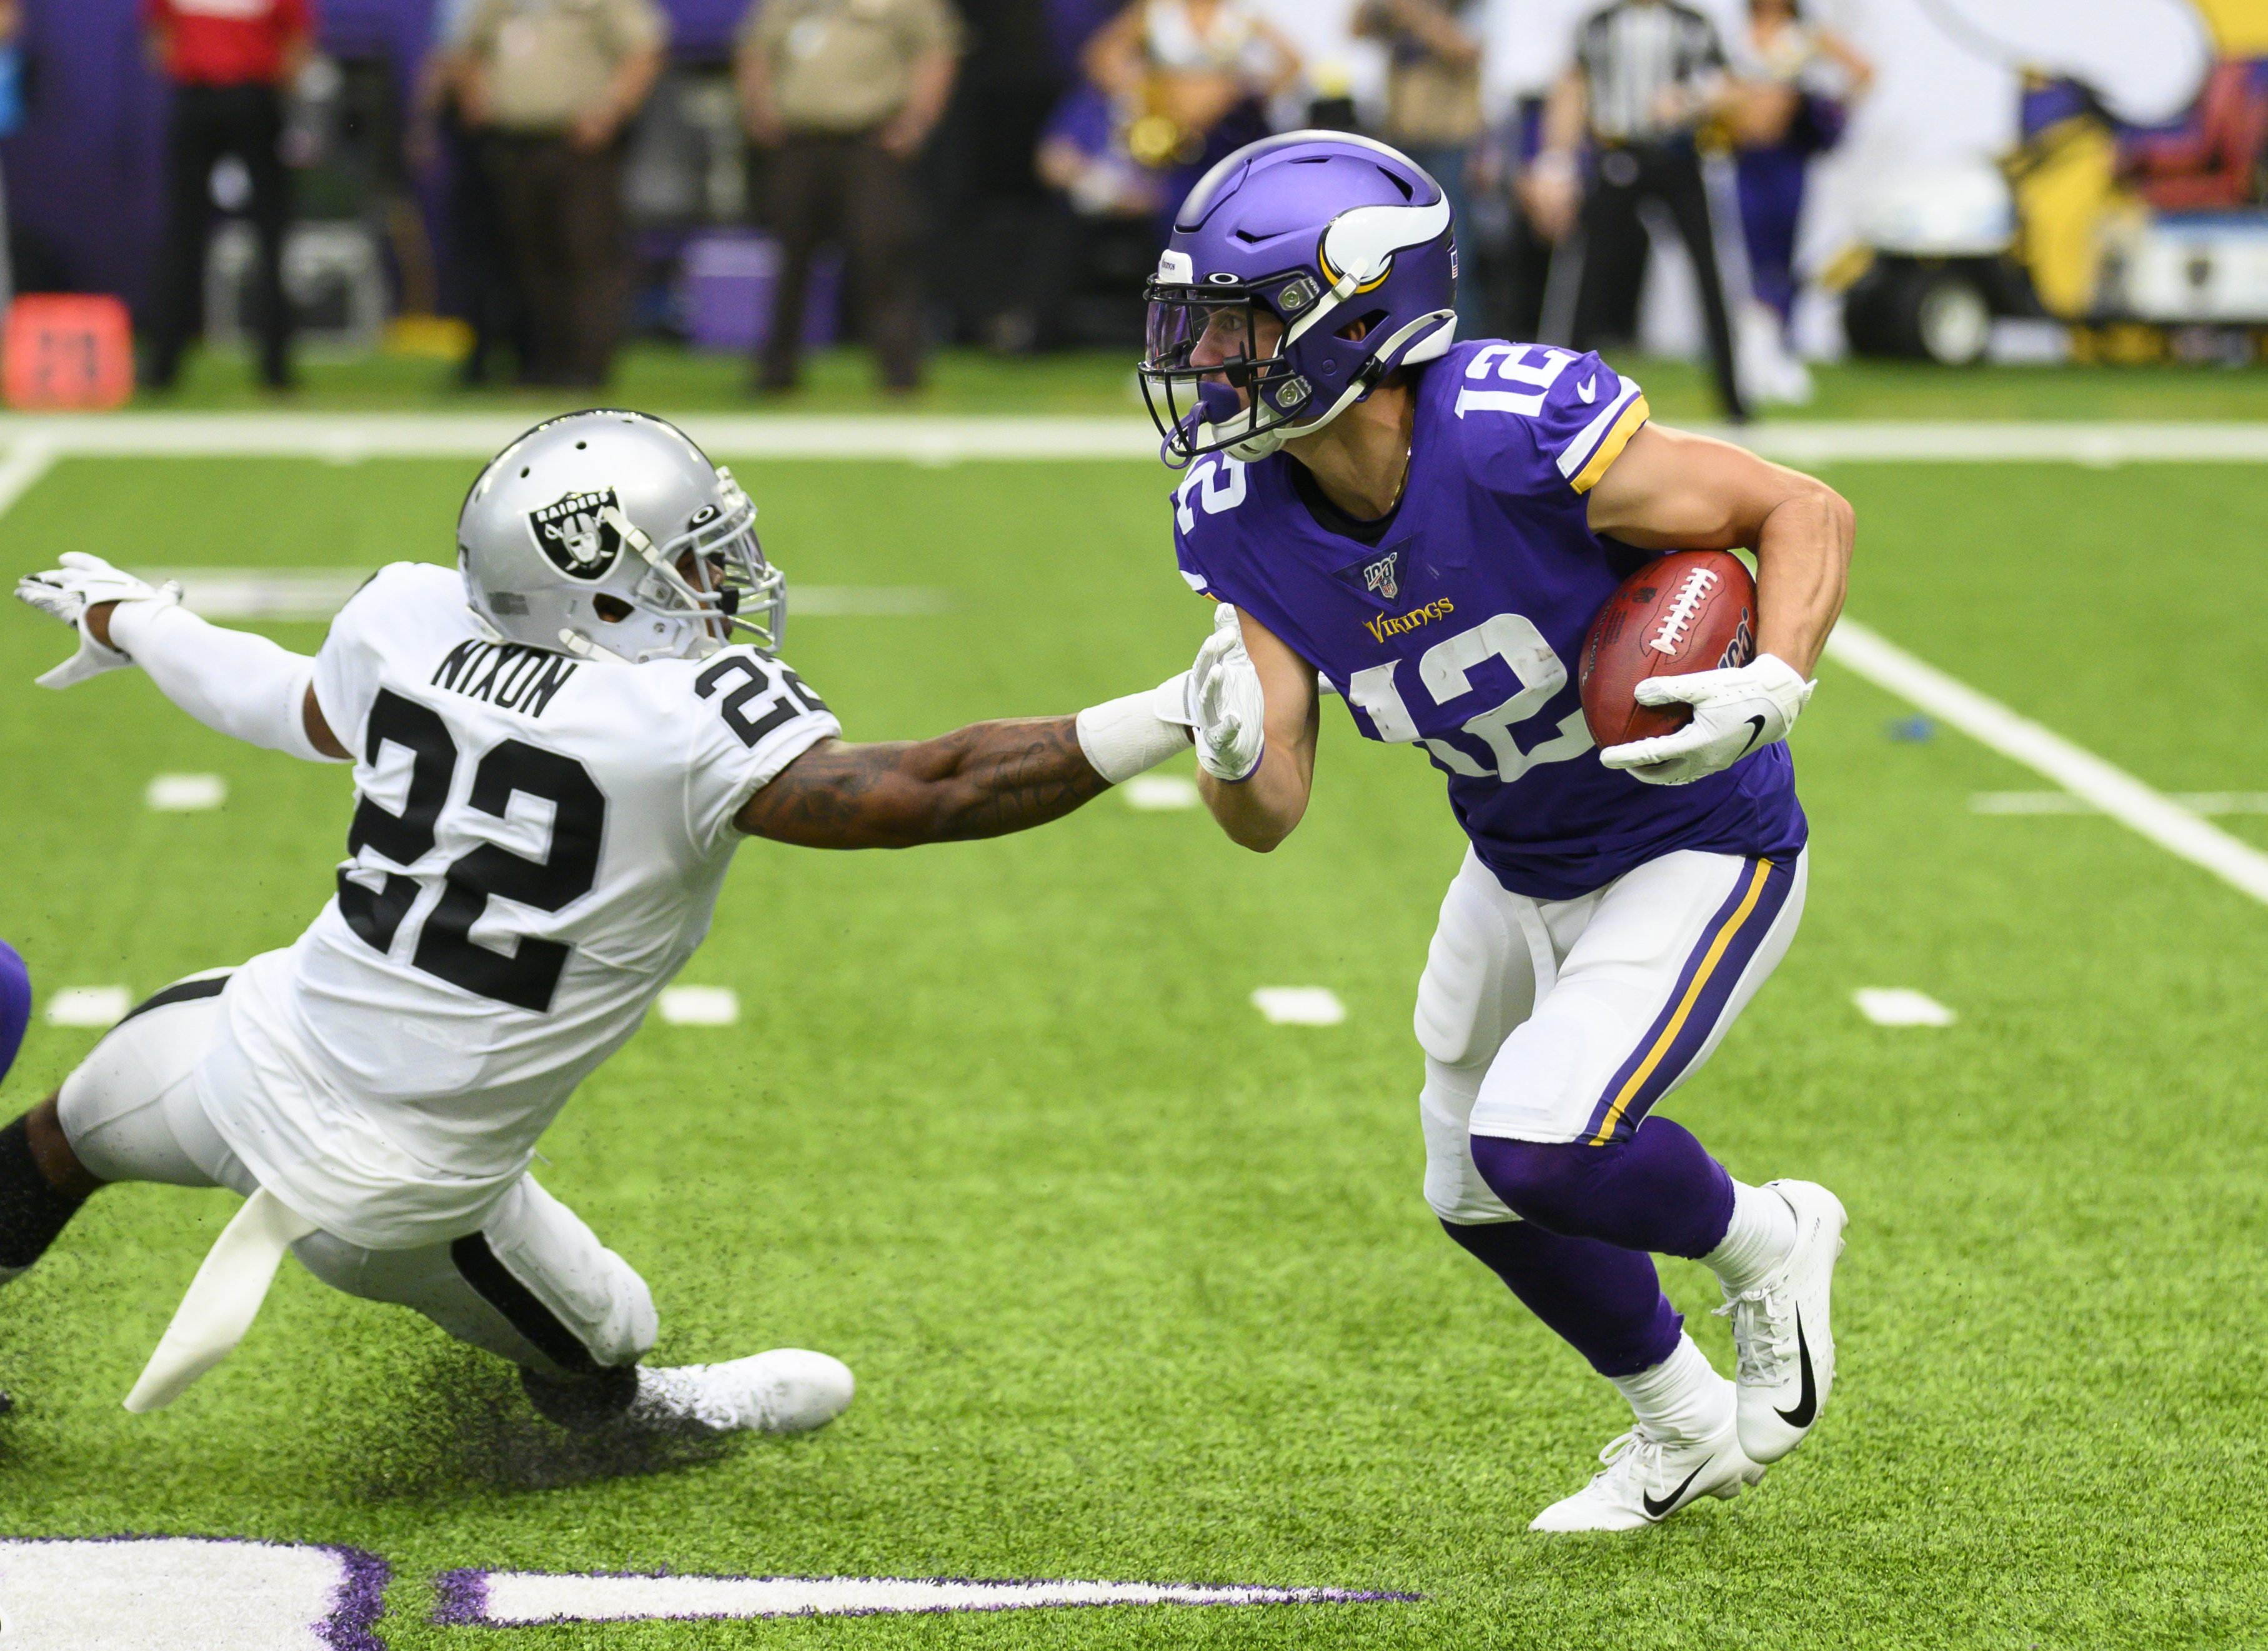 A Raider attempts to block a running Viking in an NFL game